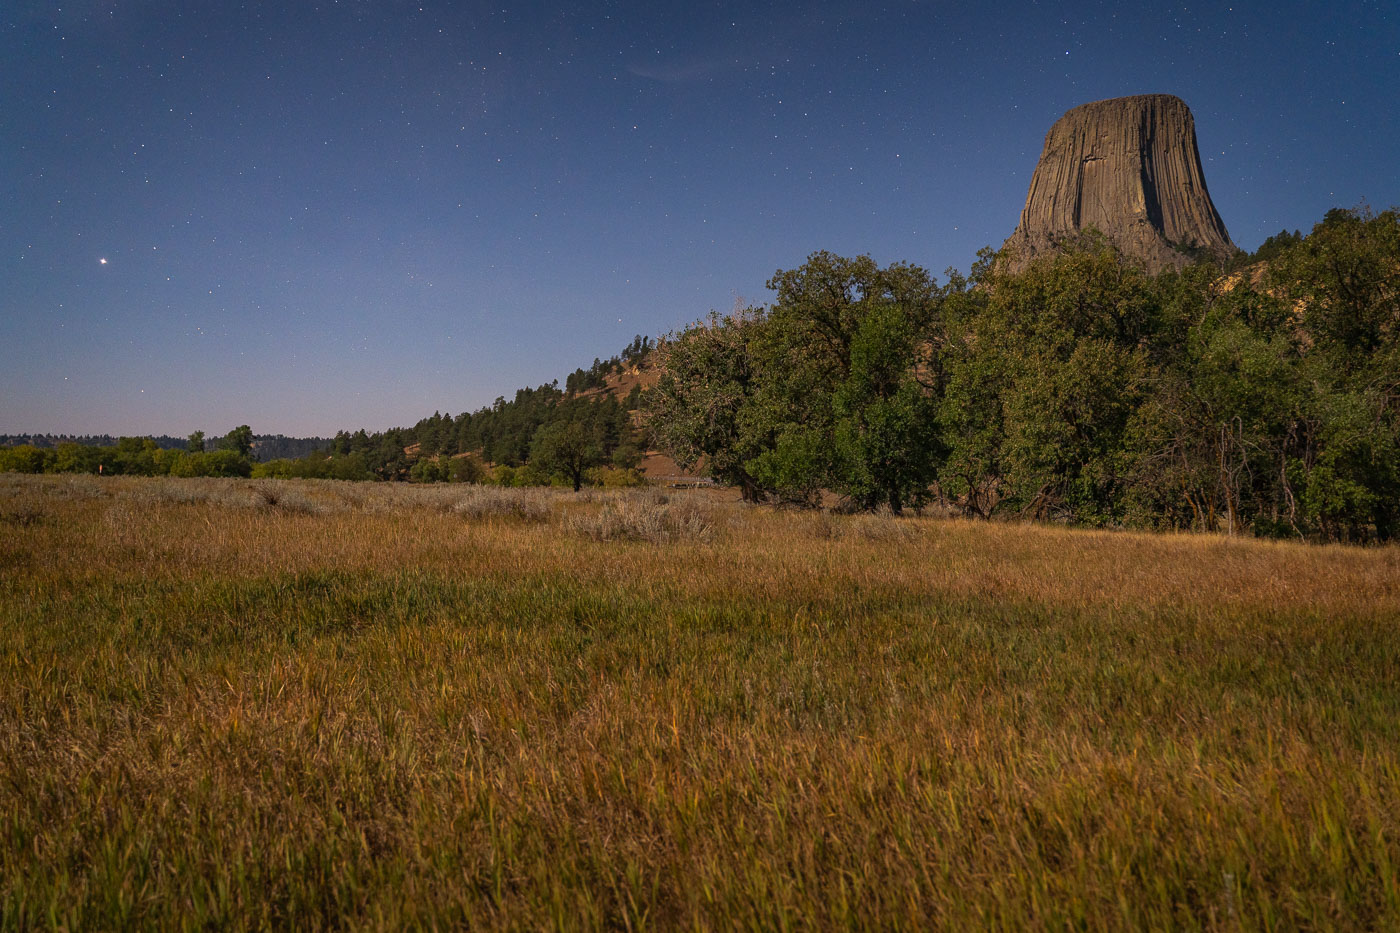 Devils Tower National Monument at night